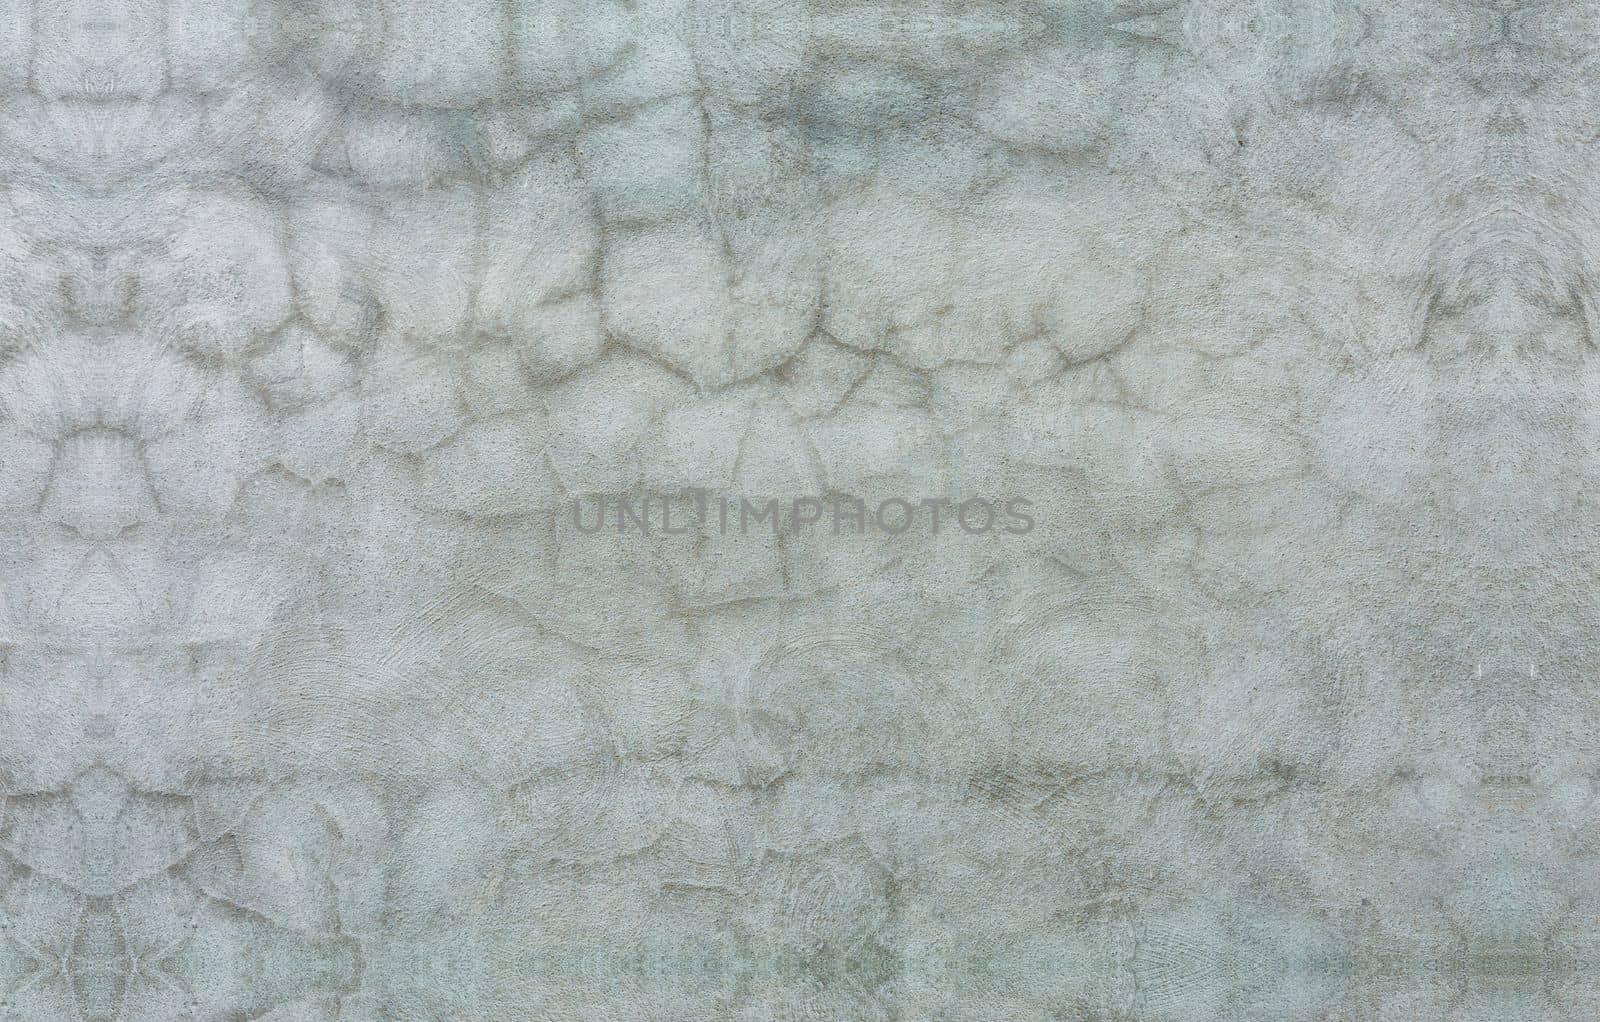 Cracked gray wall background. Details of a textured gray wall, Granite textured gray wall background. Texture of a gray wall. Gray wall of house with texture by isaiphoto